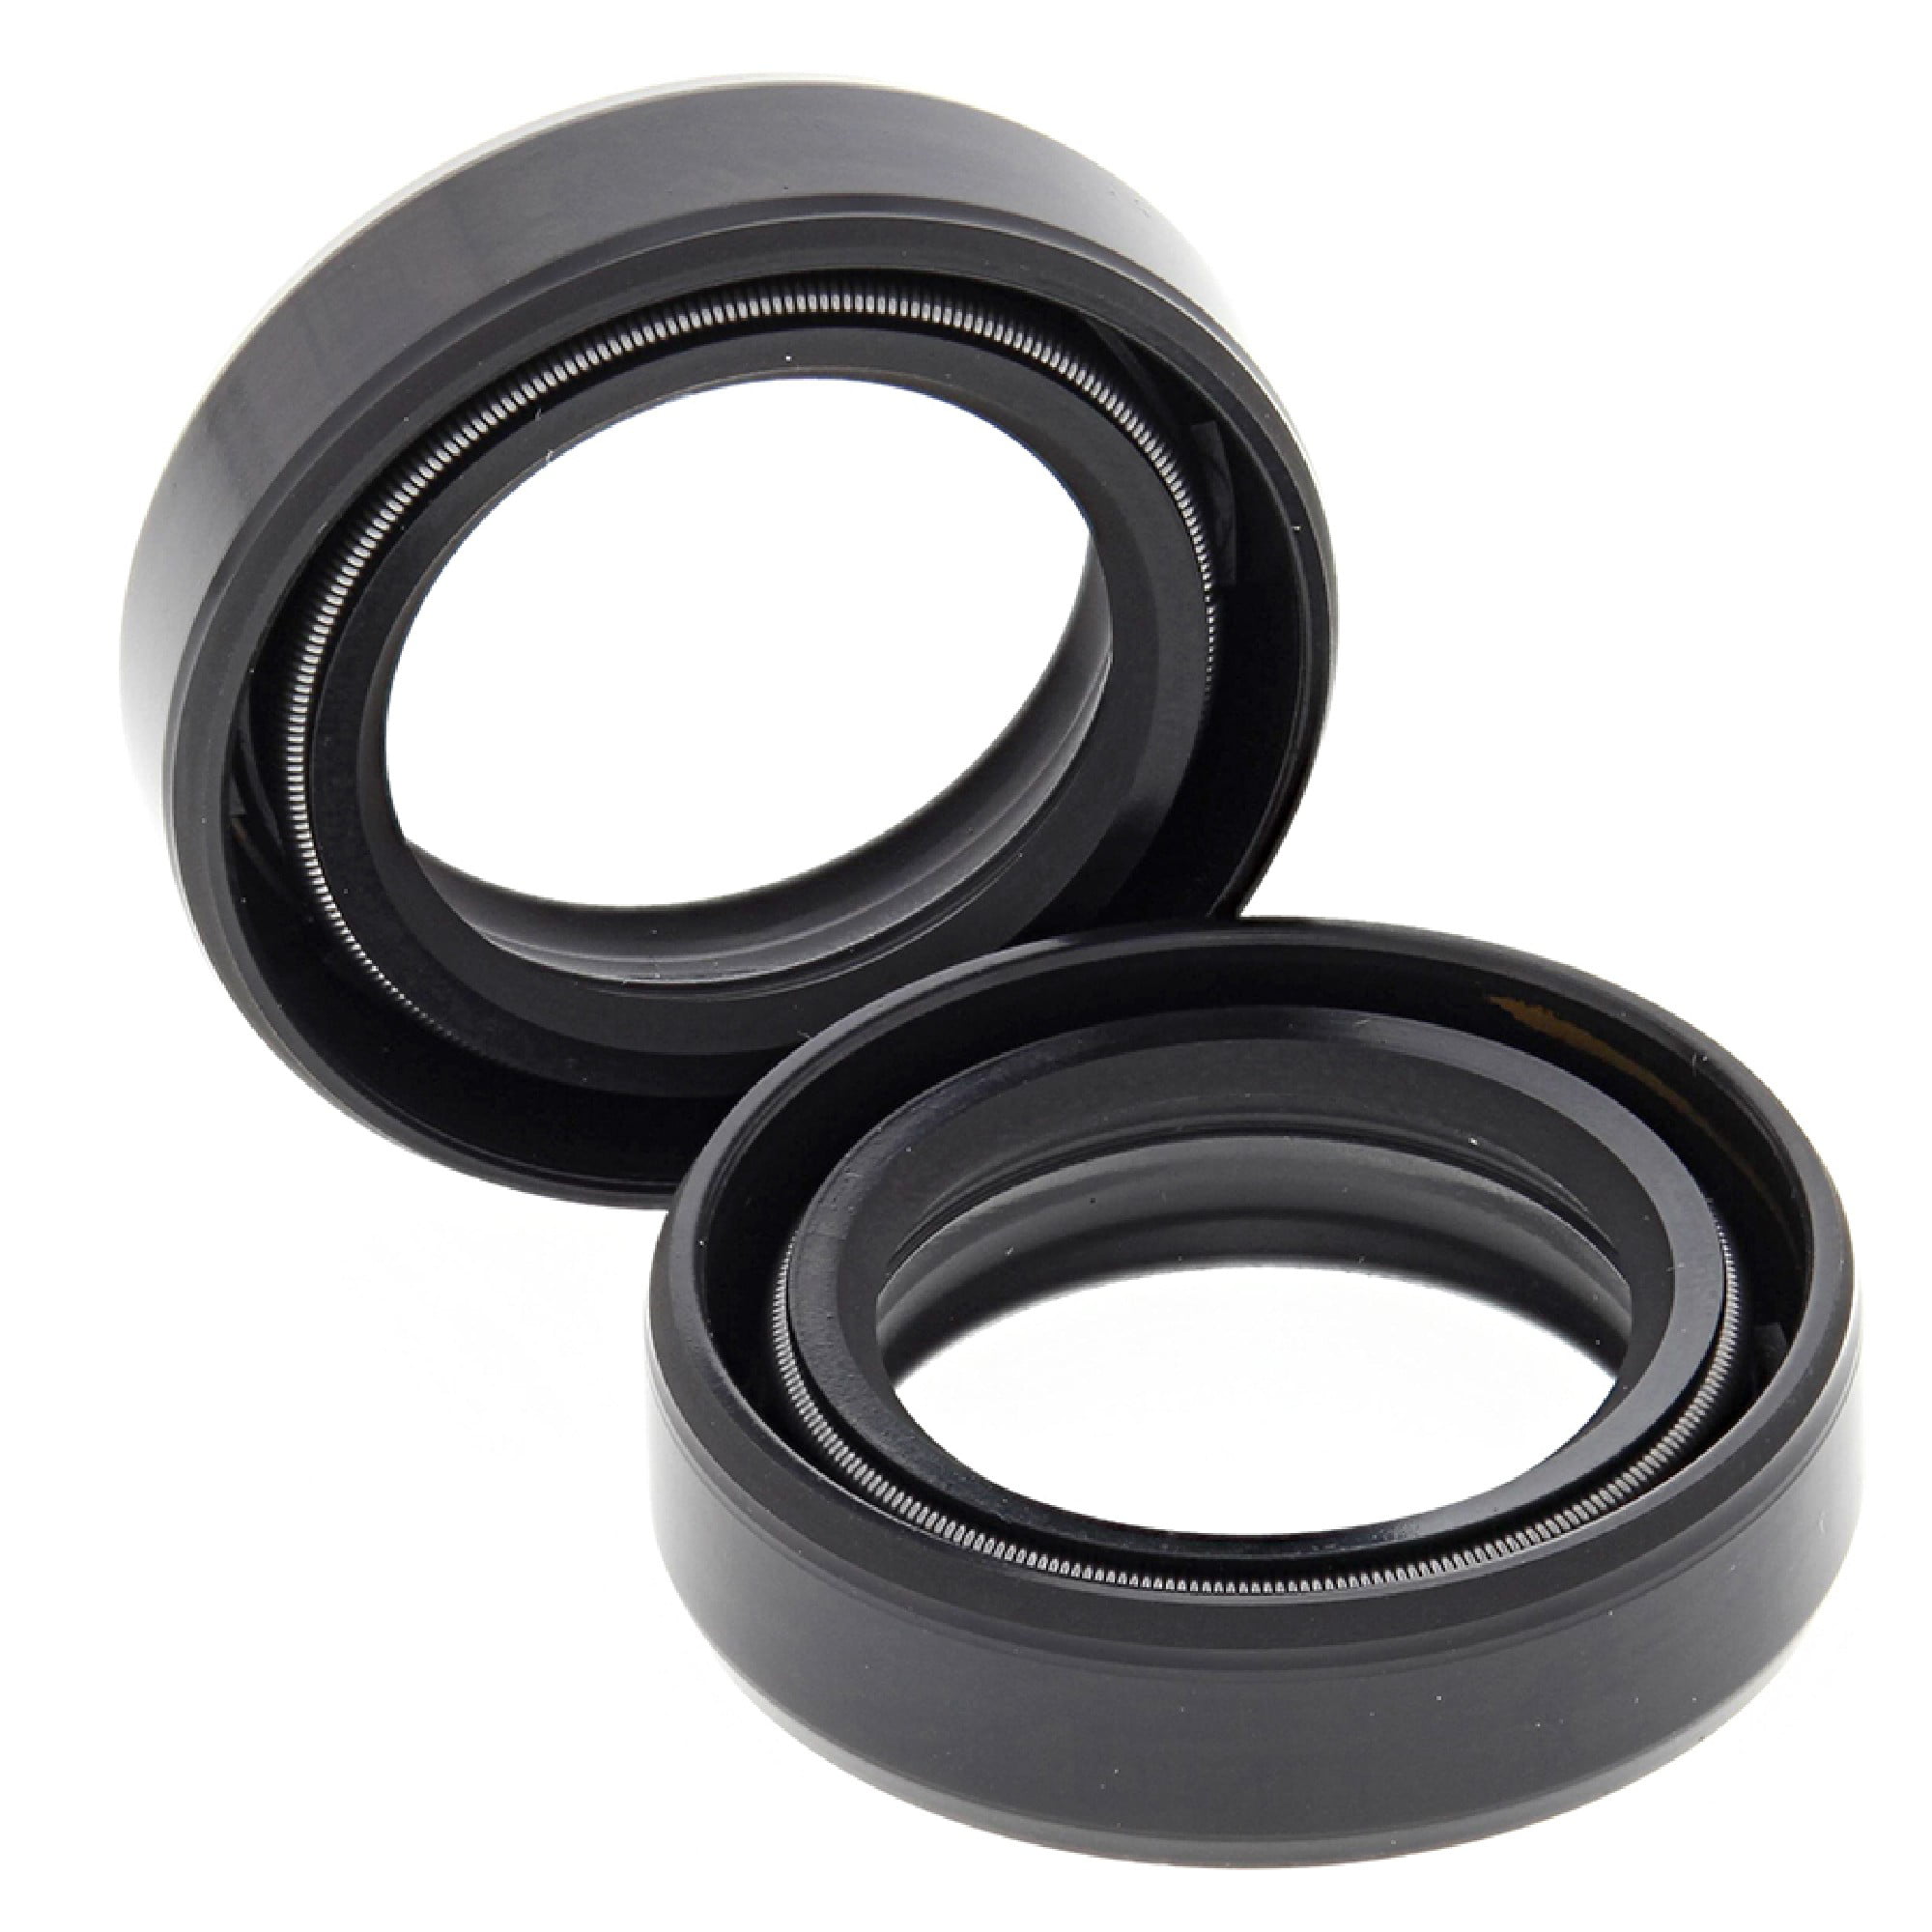 KM100 1976-1981 All Balls Racing Fork Seal Kit Compatible With/Replacement For Kawasaki KC100 1976 55-101 KD 100 1977-1979 KD80 1975-1990 